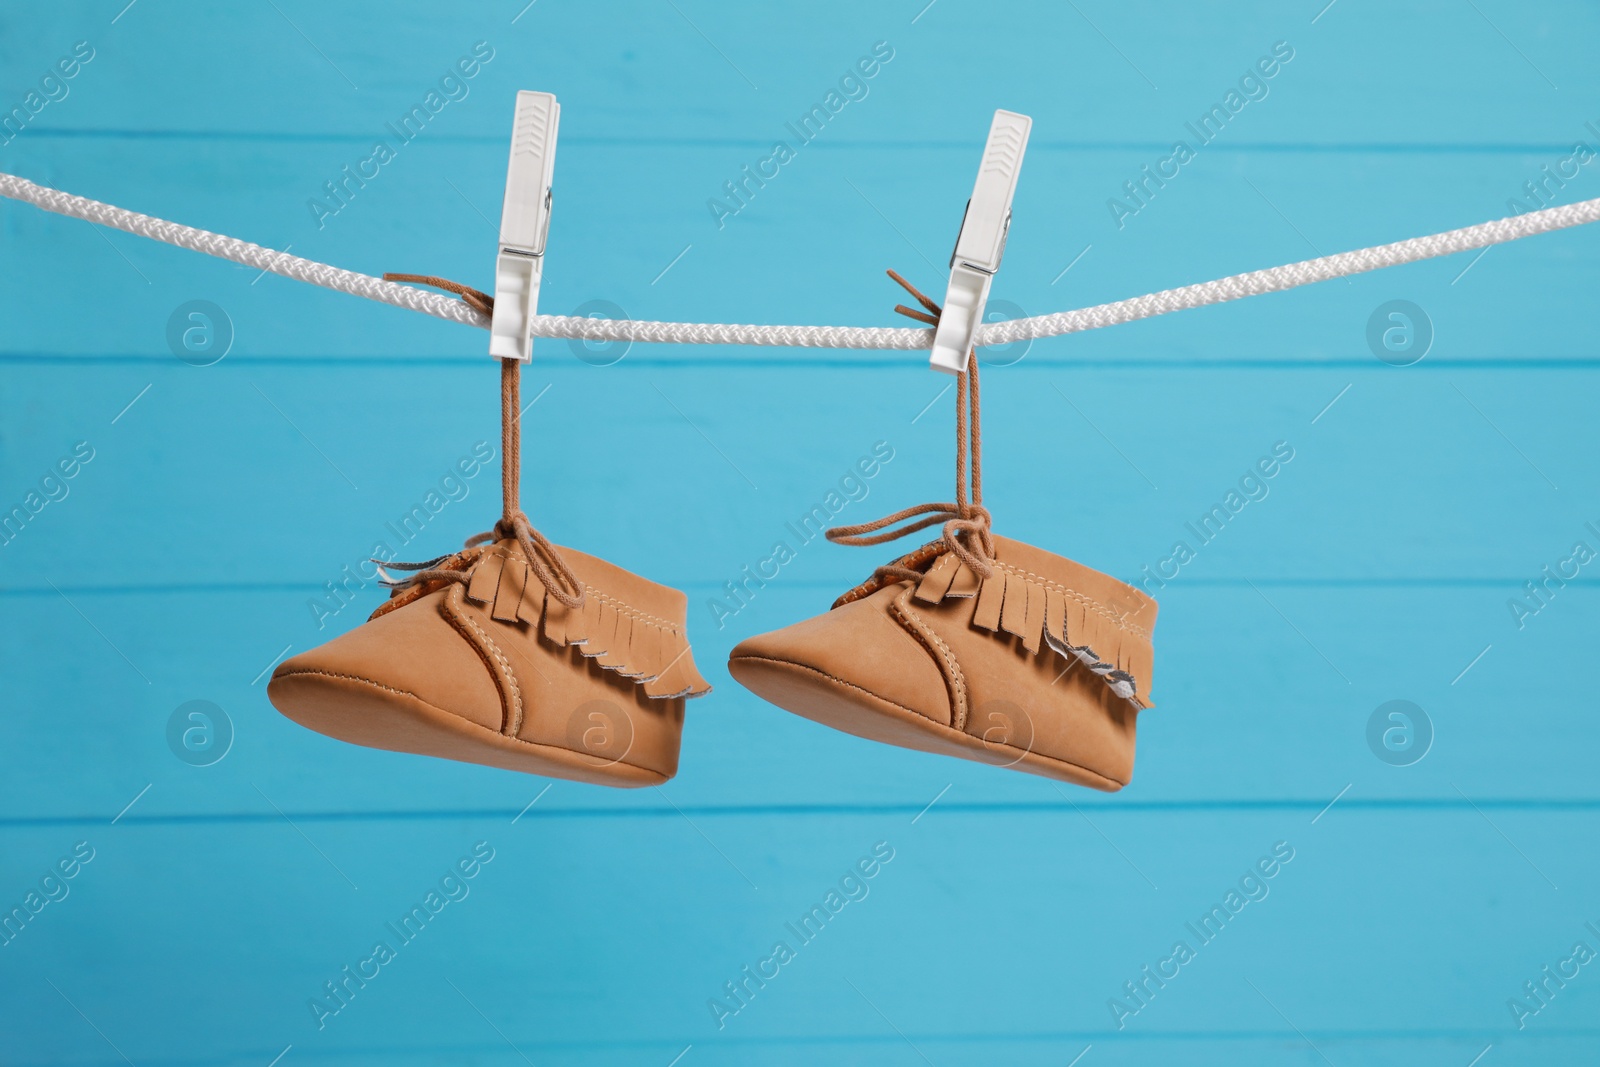 Photo of Cute baby shoes drying on washing line against light blue wooden wall